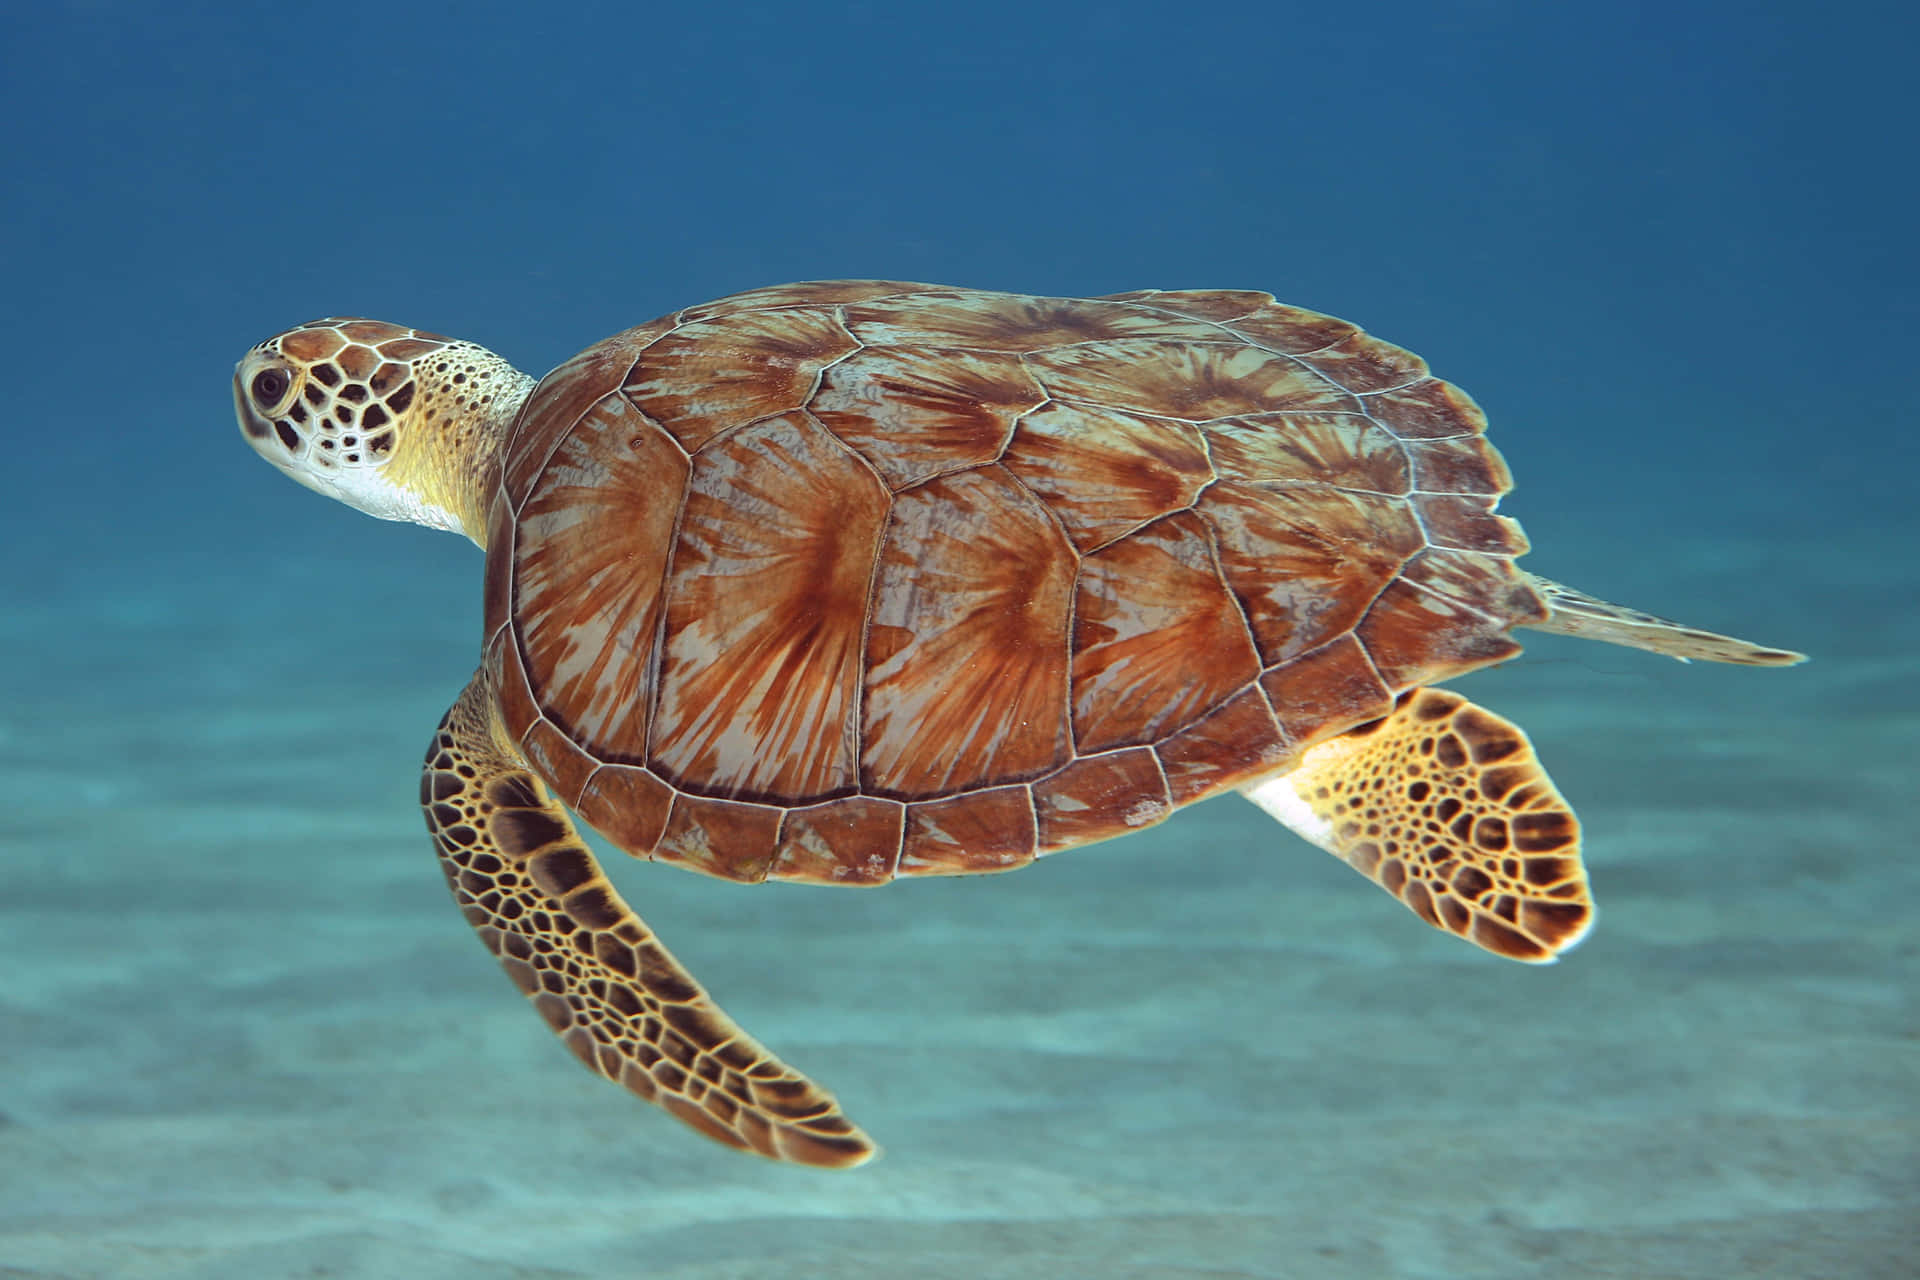 A Sea Turtle Emerging from the Ocean